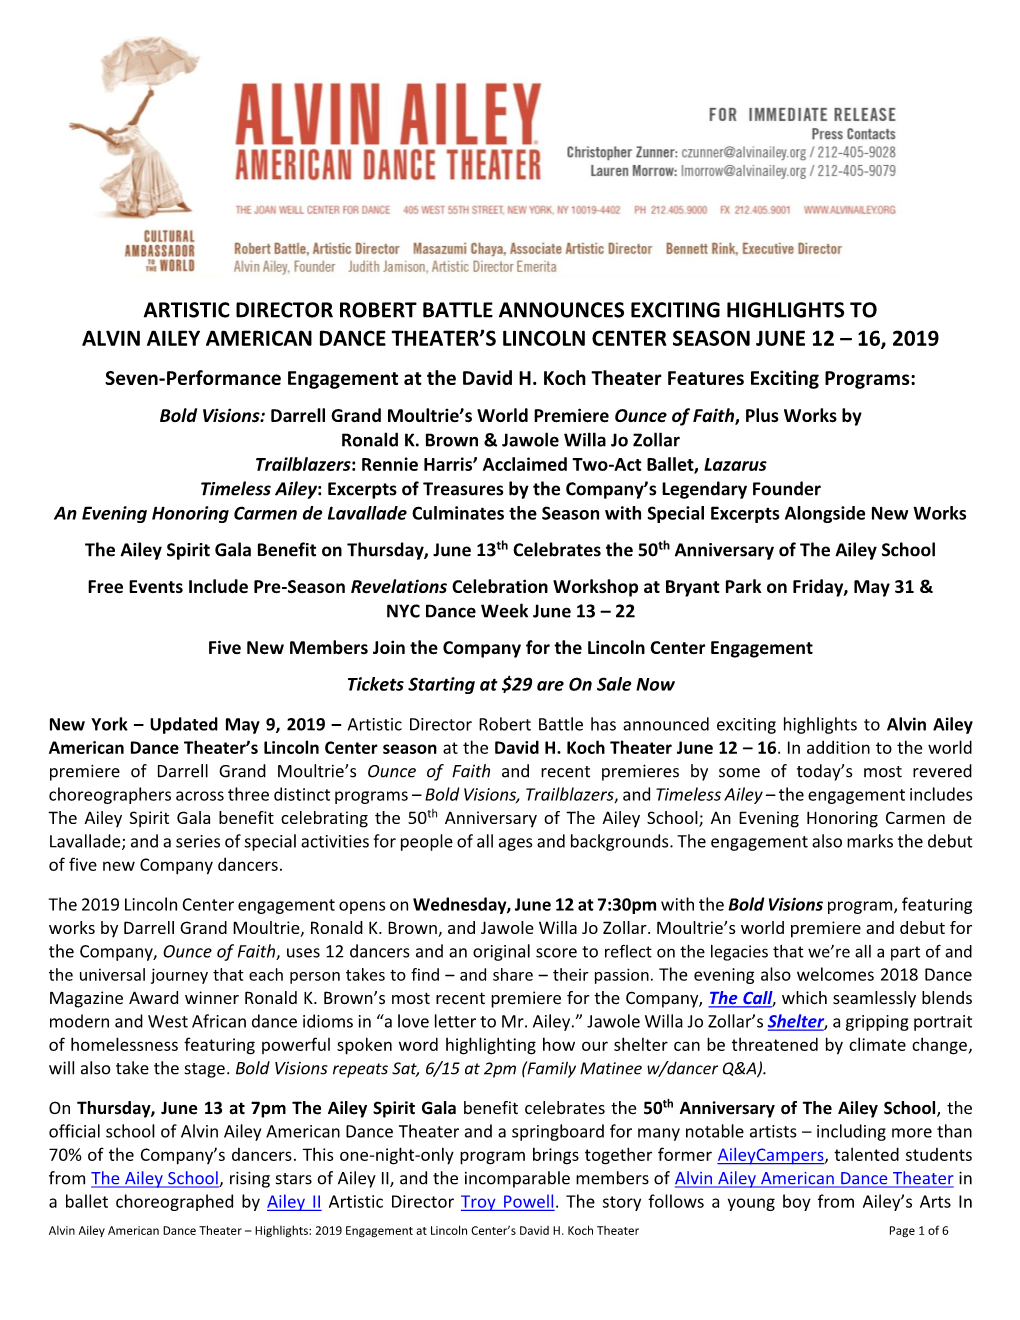 Artistic Director Robert Battle Announces Exciting Highlights to Alvin Ailey American Dance Theater’S Lincoln Center Season June 12 – 16, 2019